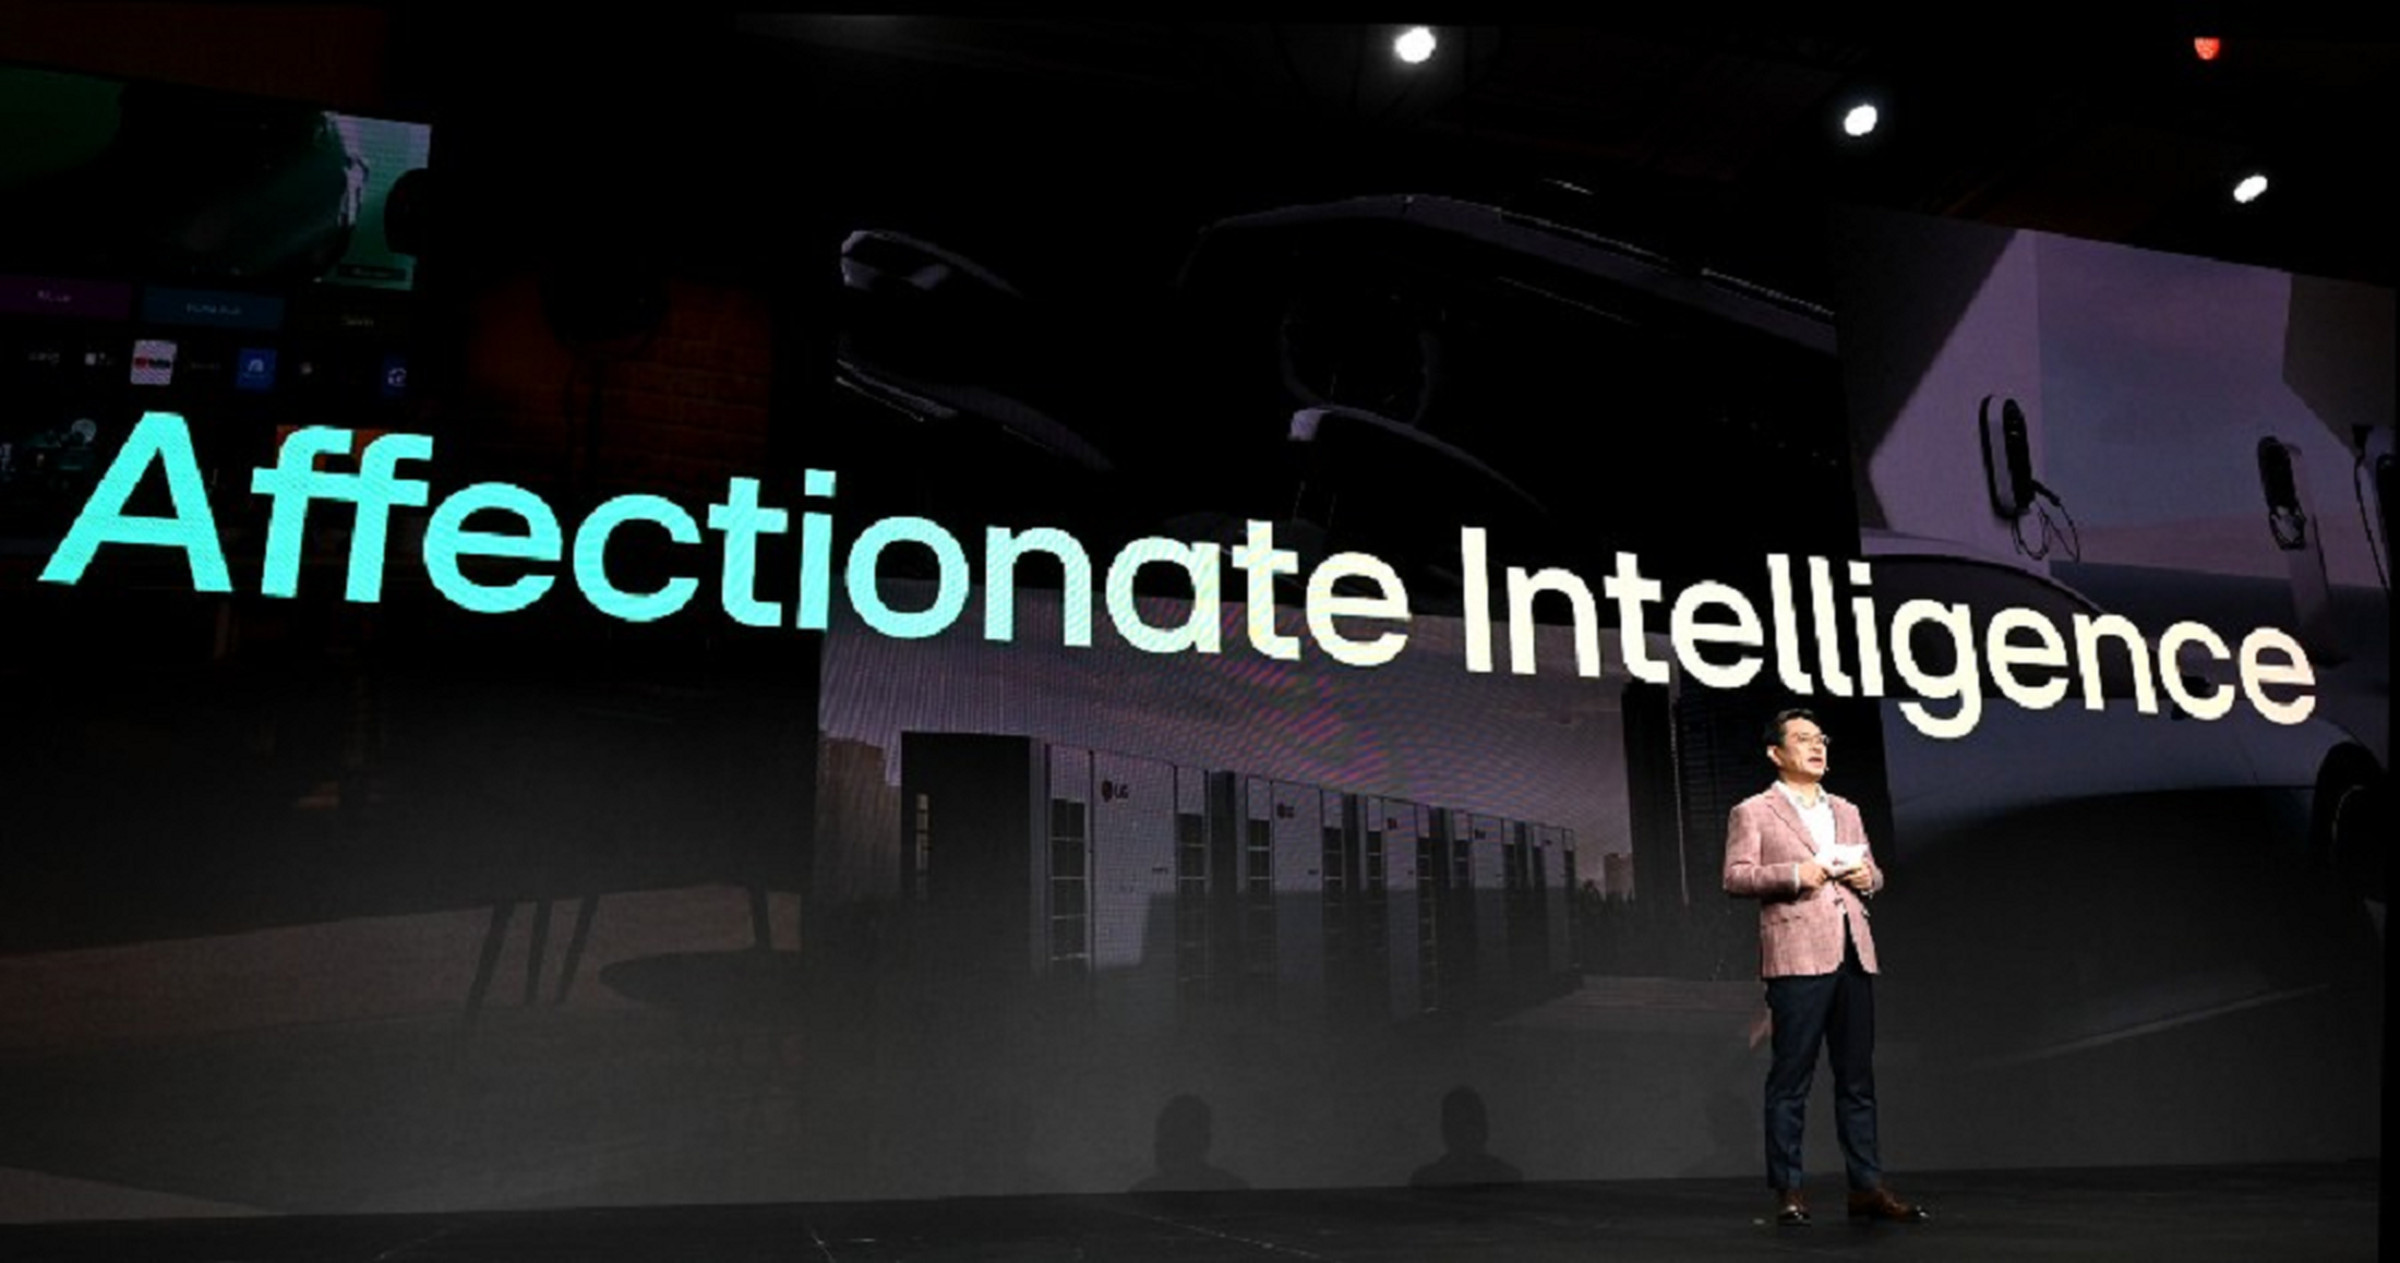 An image of LG CEO William Cho standing in front of a screen that says “Affectionate Intelligence.”